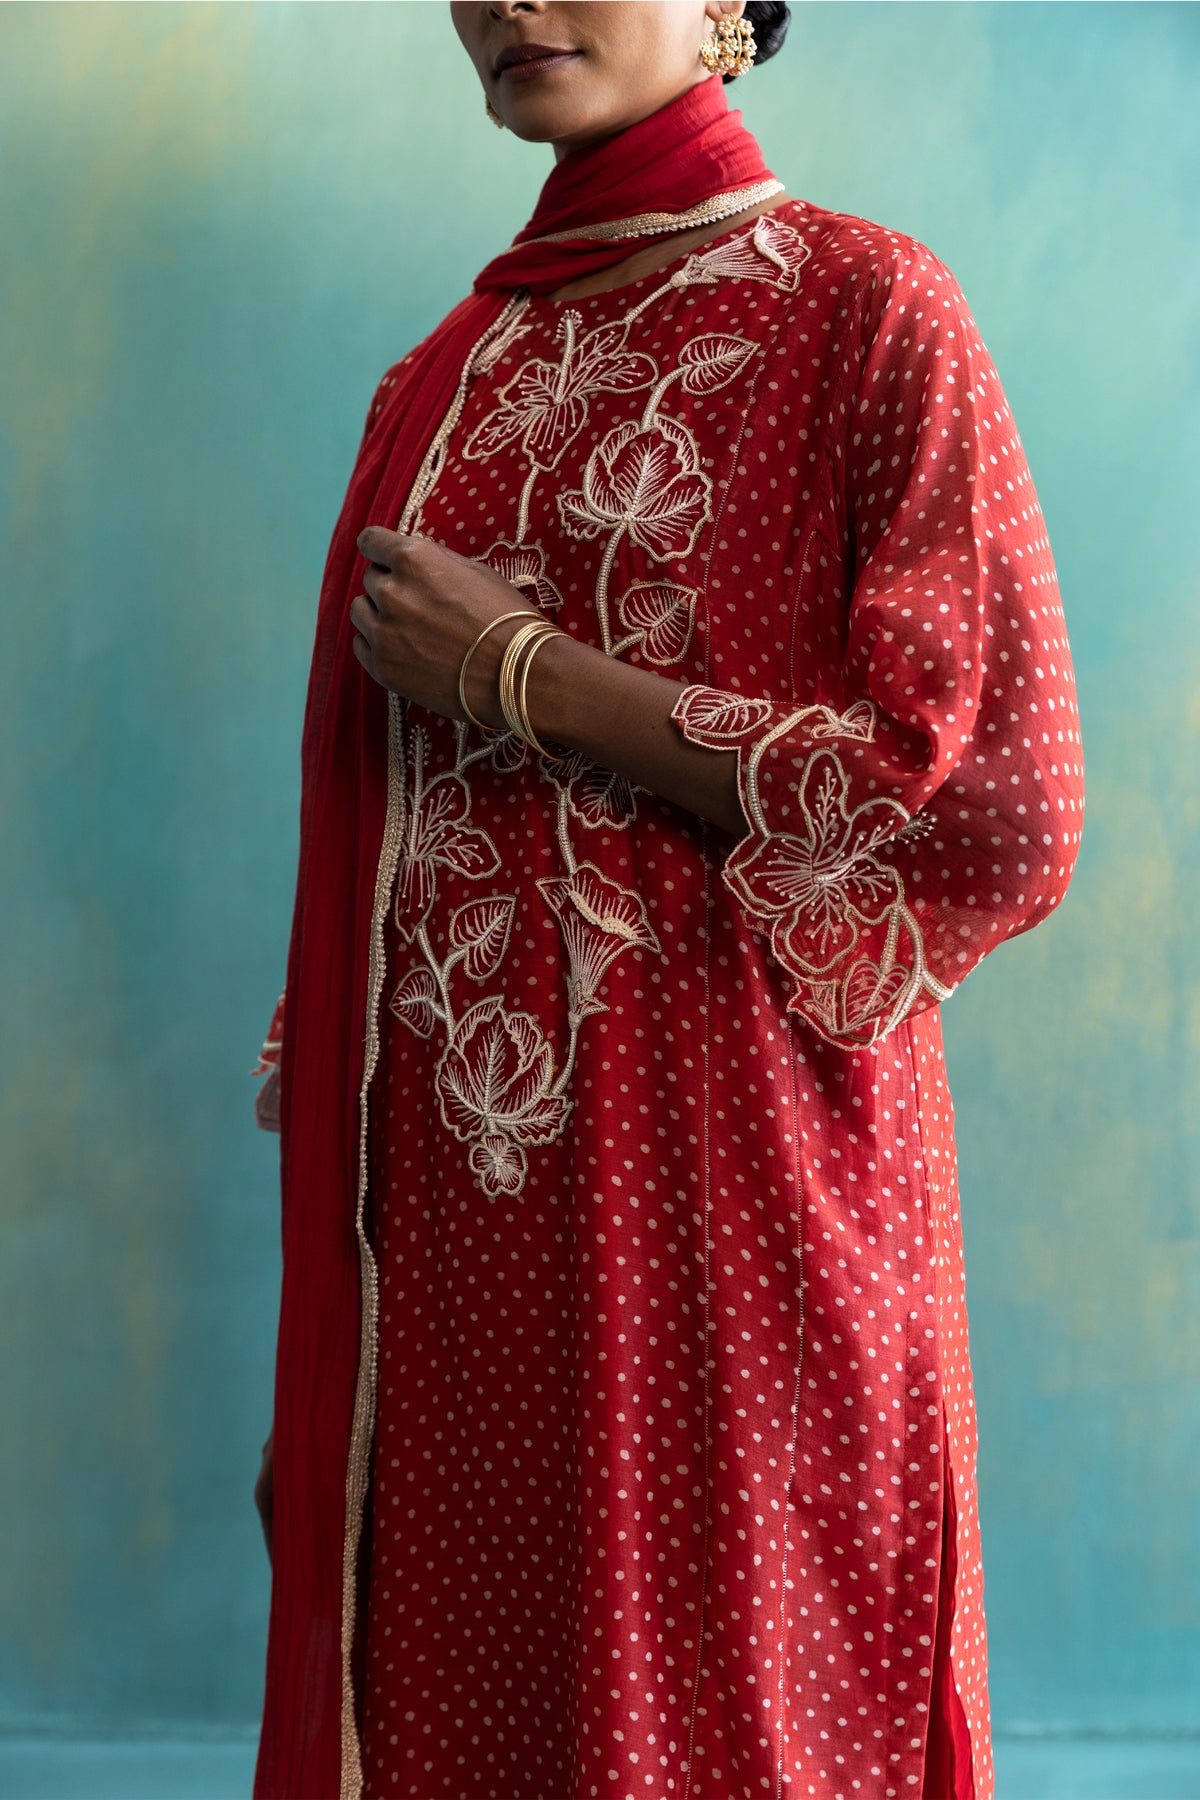 DIL-KASH RED CHANDERI KURTA WITH LONG YOKE FLORAL EMBROIDERY ON POLKA FULL SET OF 3